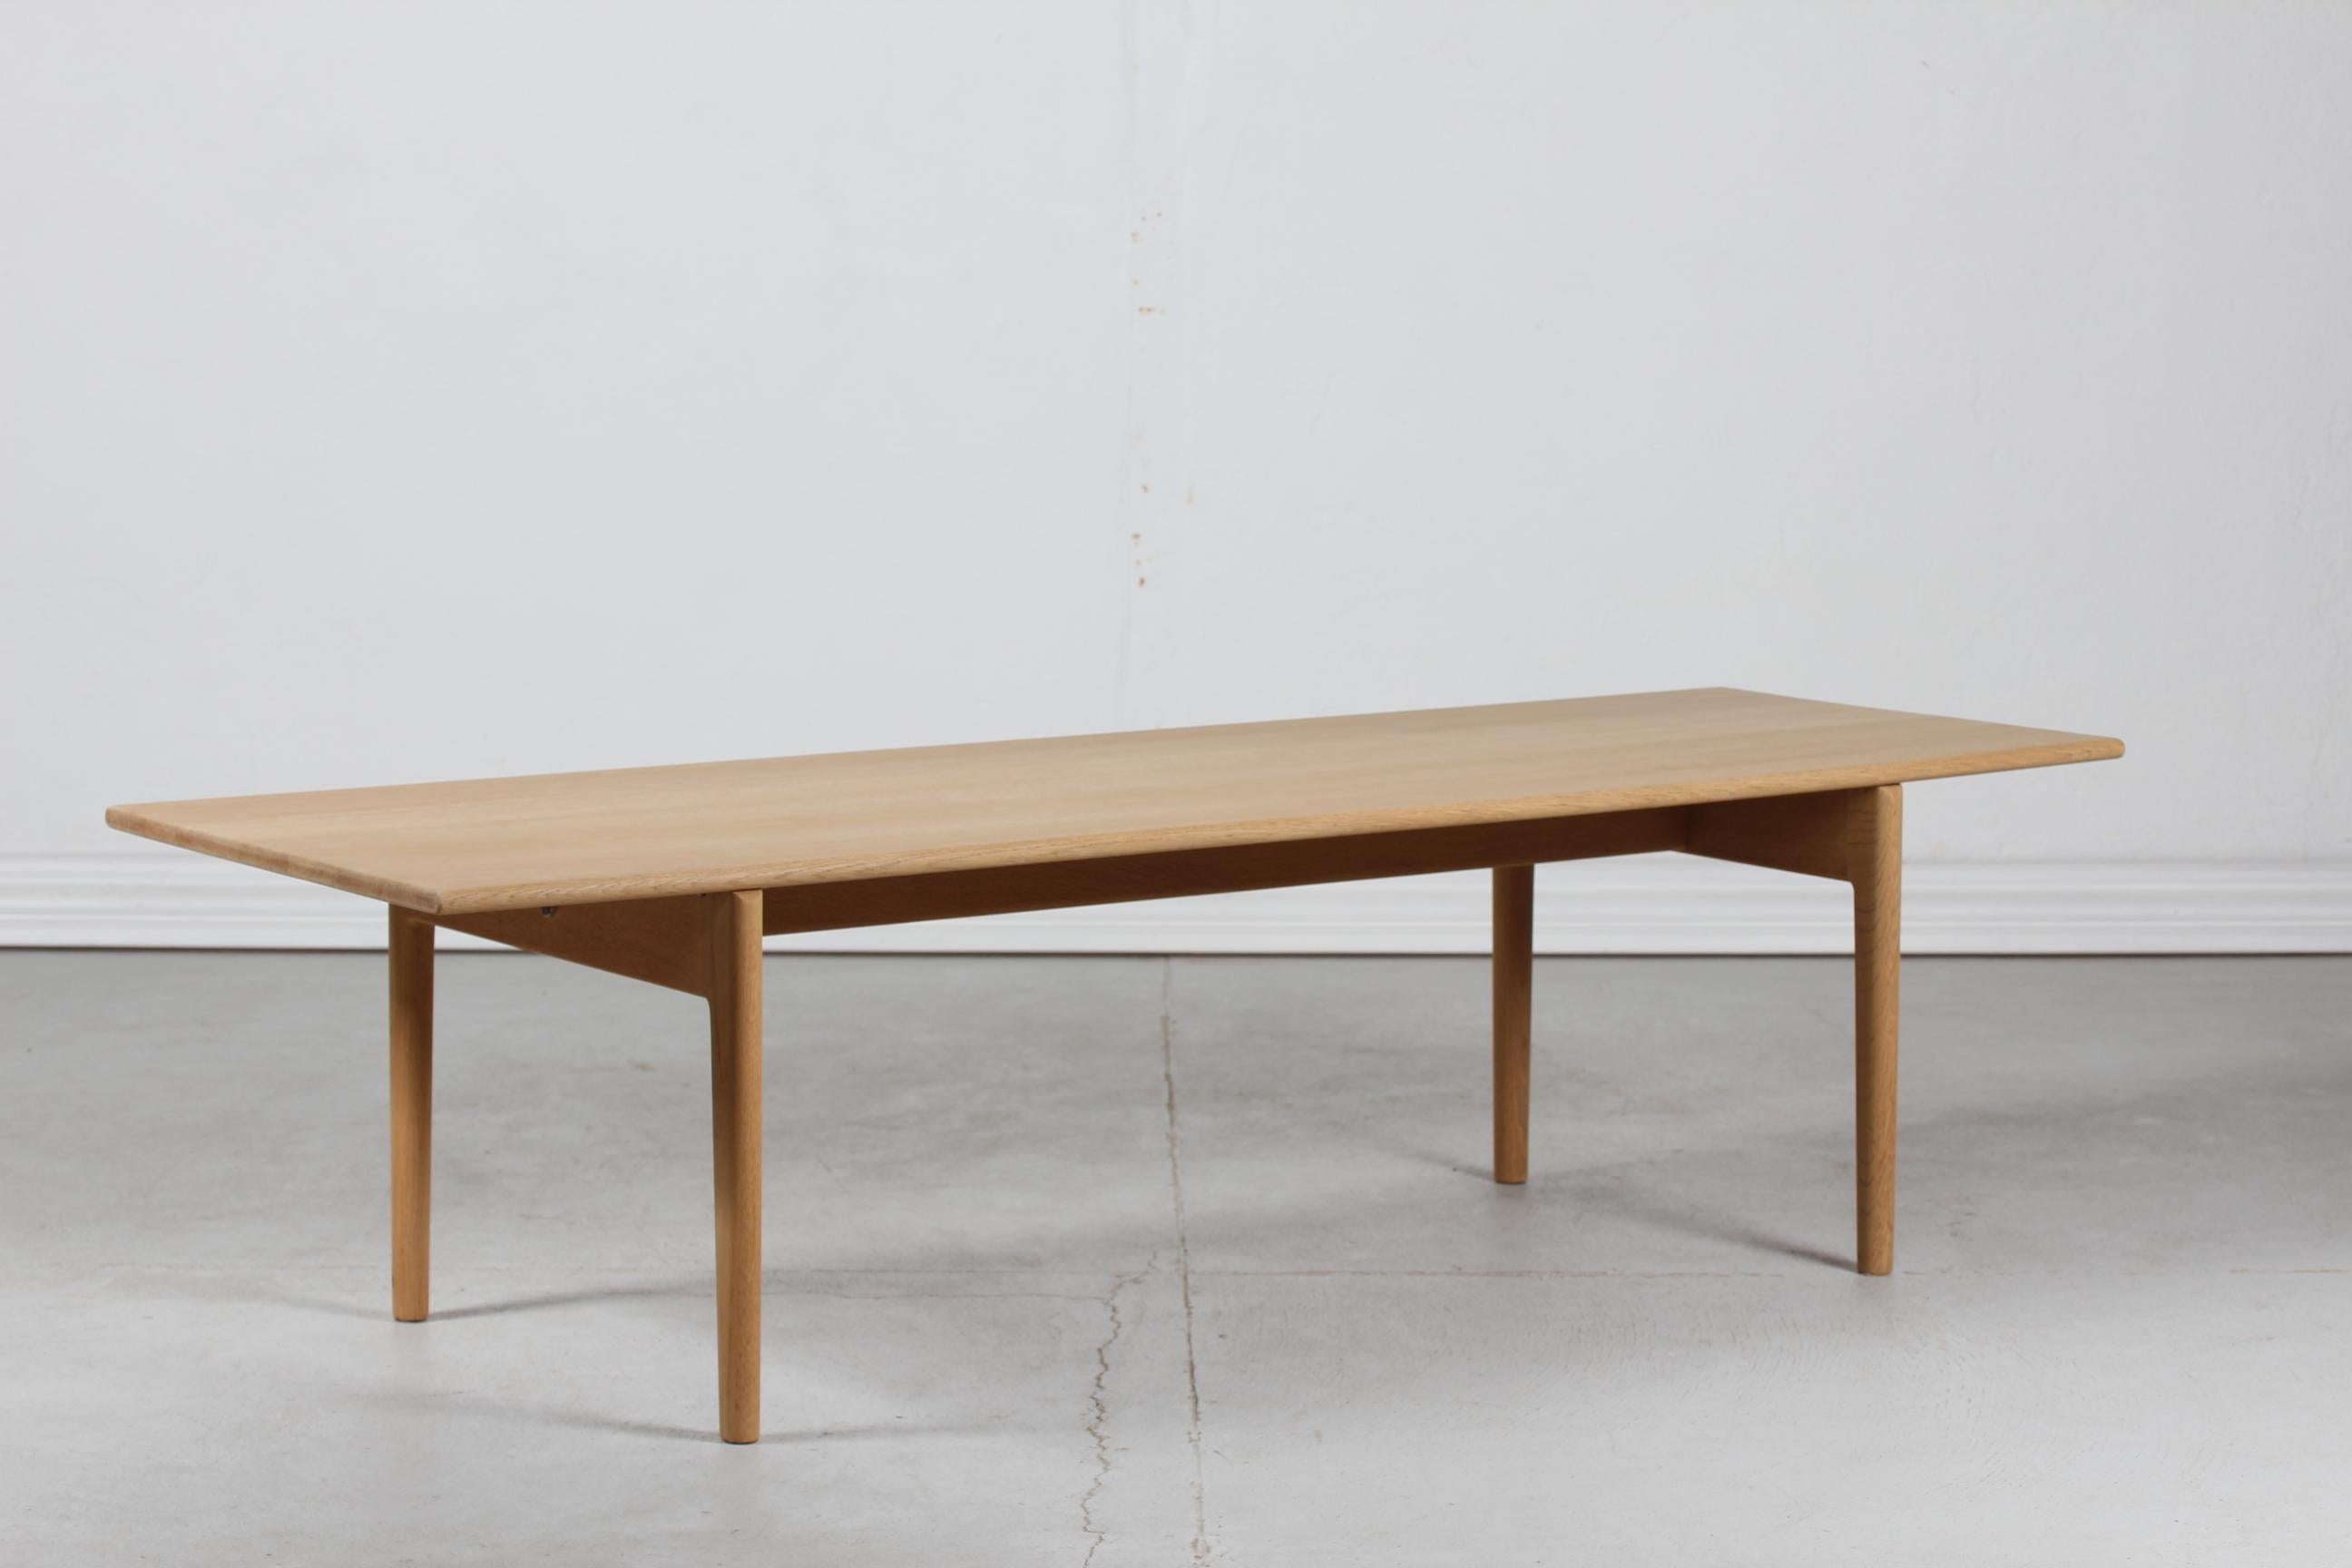 Very long coffee table by the Danish architect Hans J. Wegner (1914-2007) and manufactured by Andreas Tuck in the 1950s.

The coffee table is made of solid oak with soap treatment.

The table remains in very nice vintage condition ready for use.